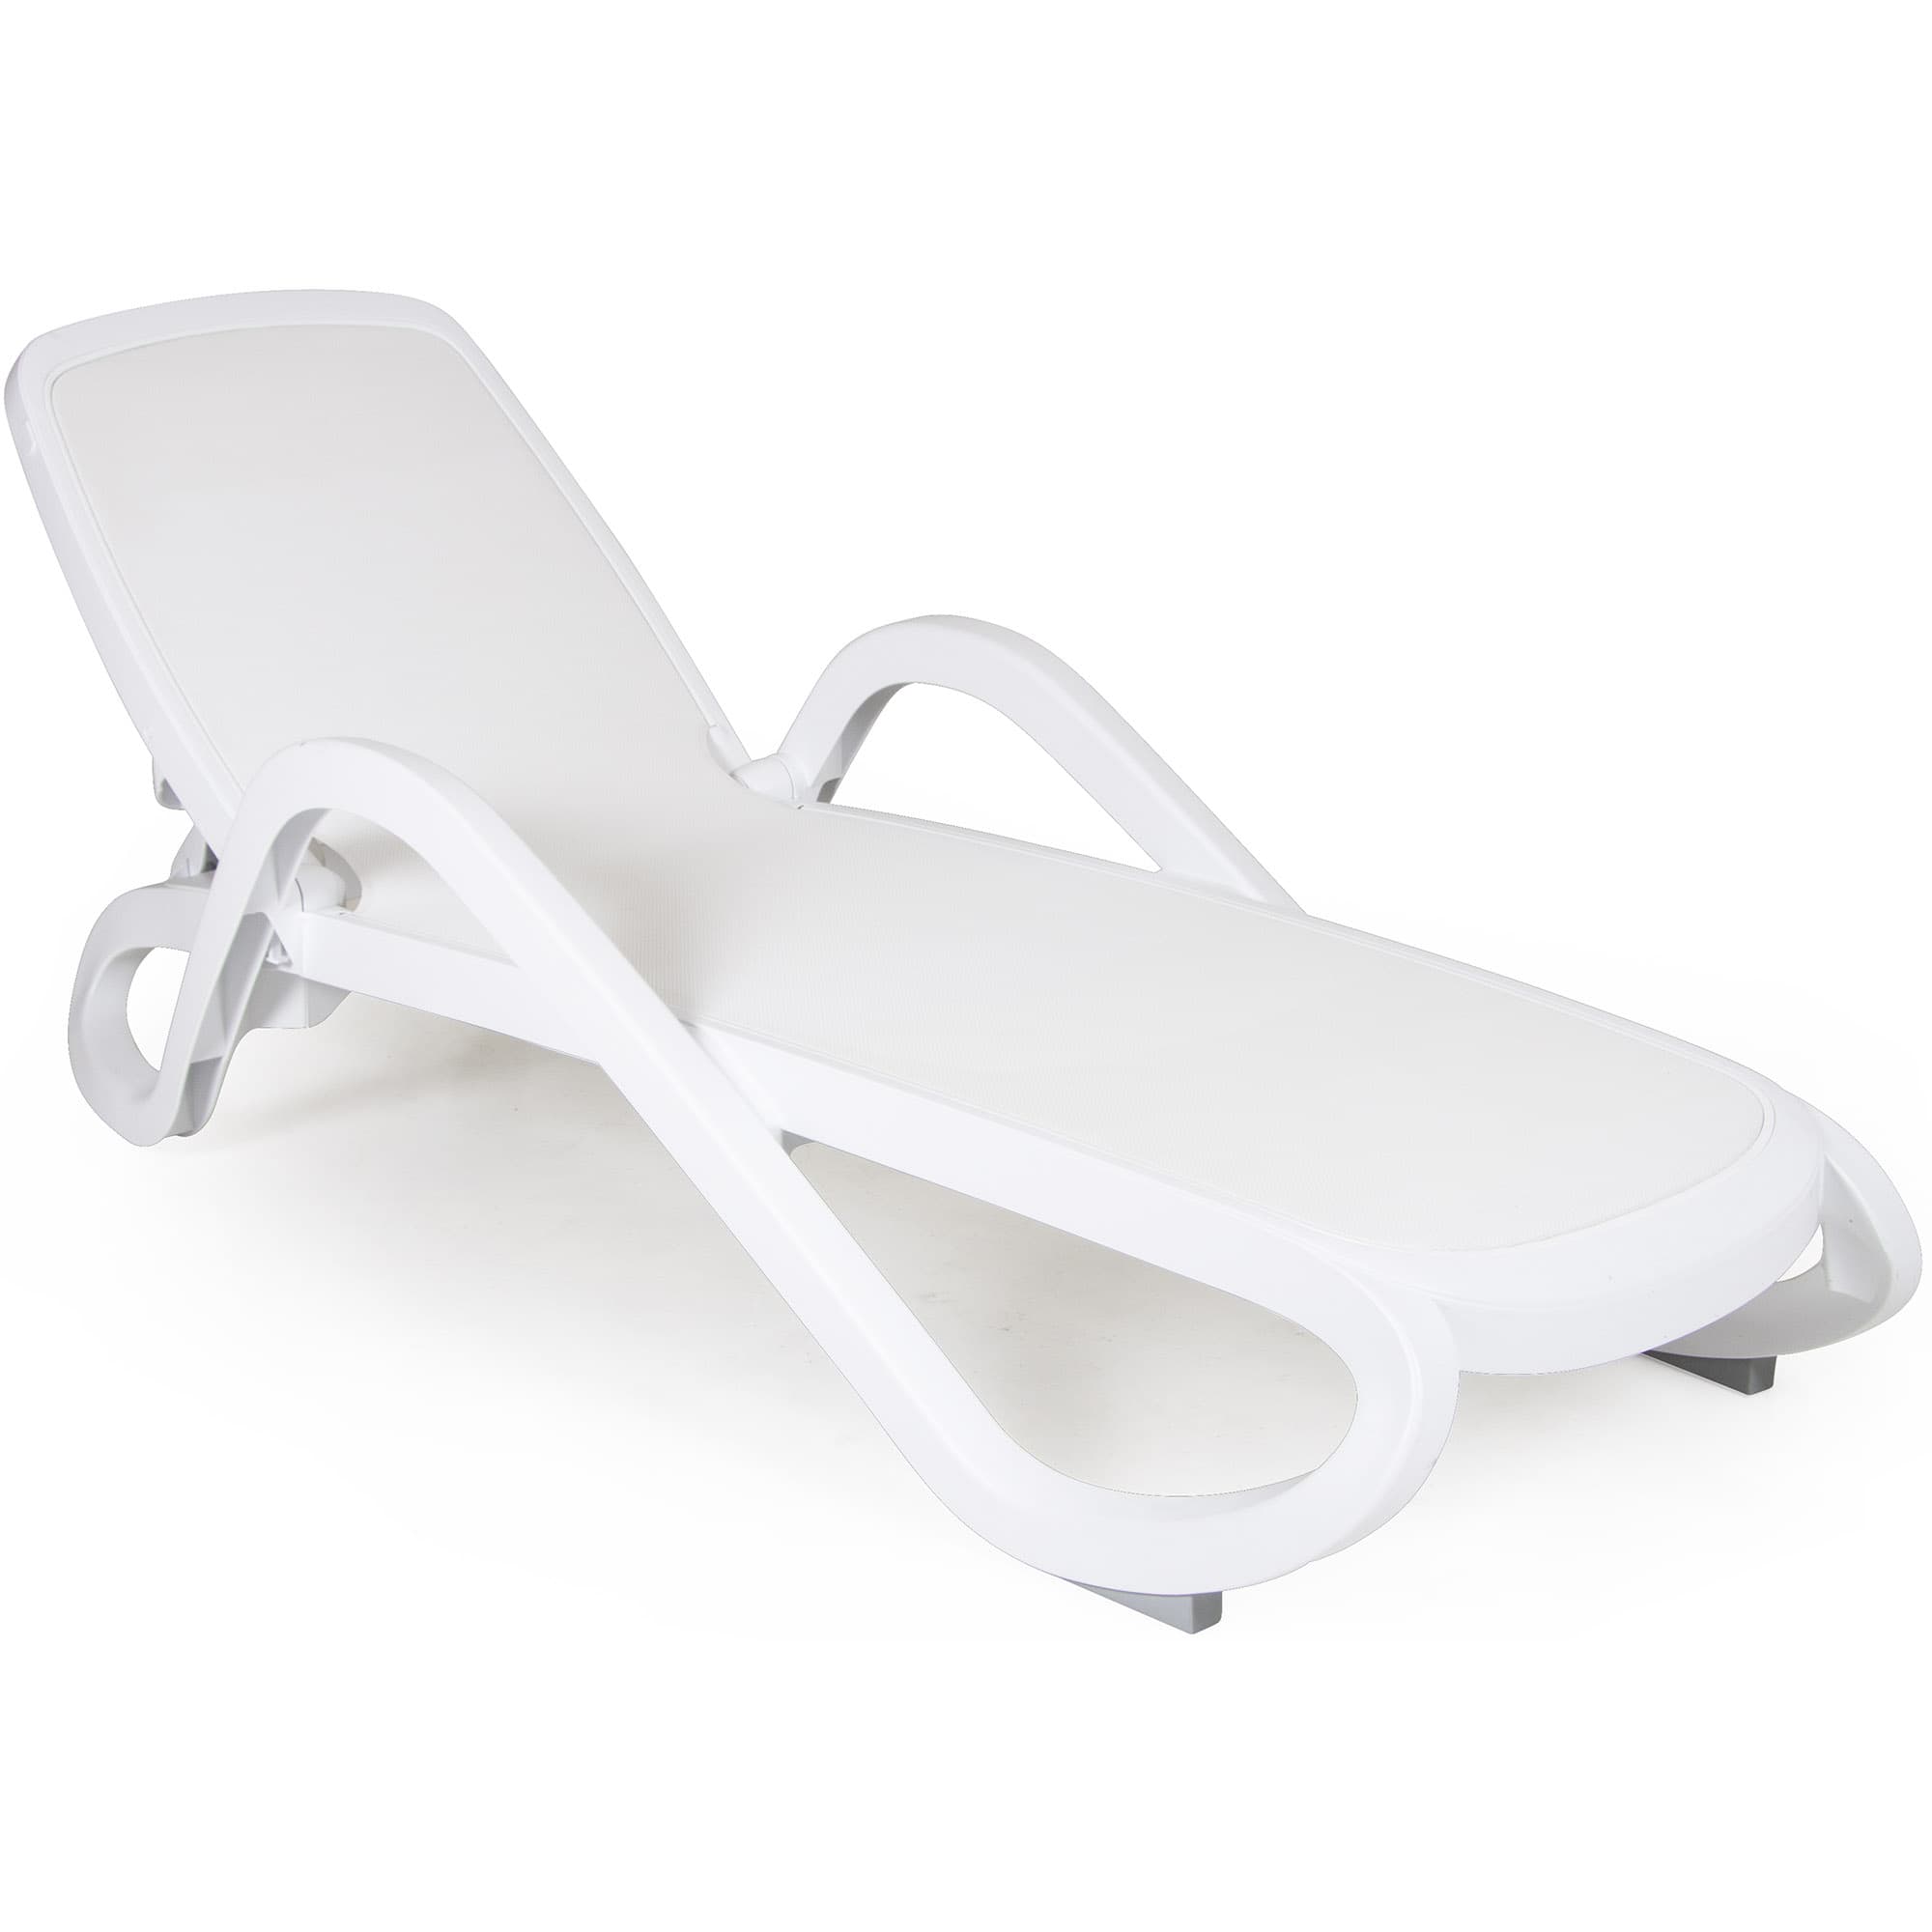 Ghế dài tắm nắng alfa sunlounger - made in Italy